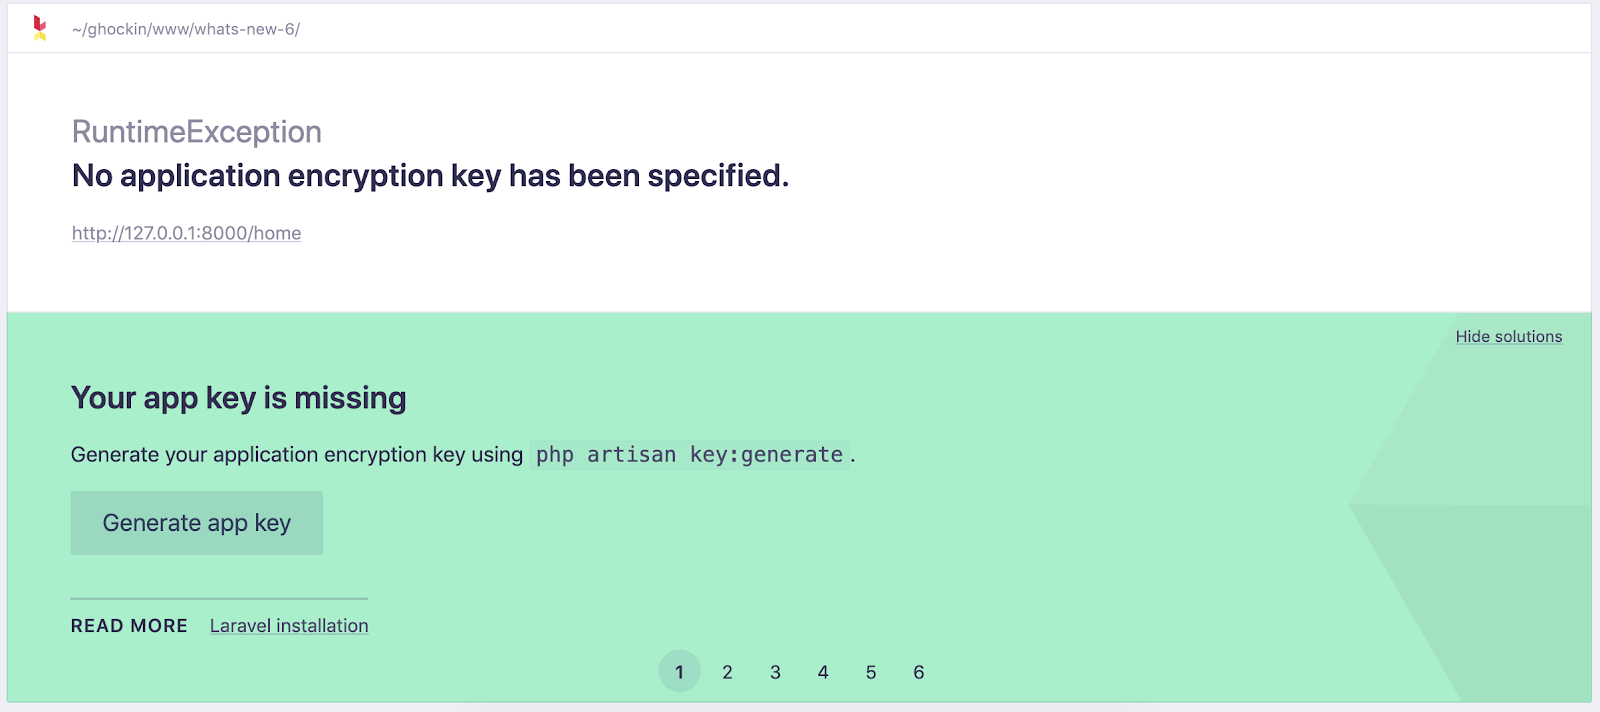 Screenshot of Ignition detecting a missing app key, and suggesting to generate a new app key itself